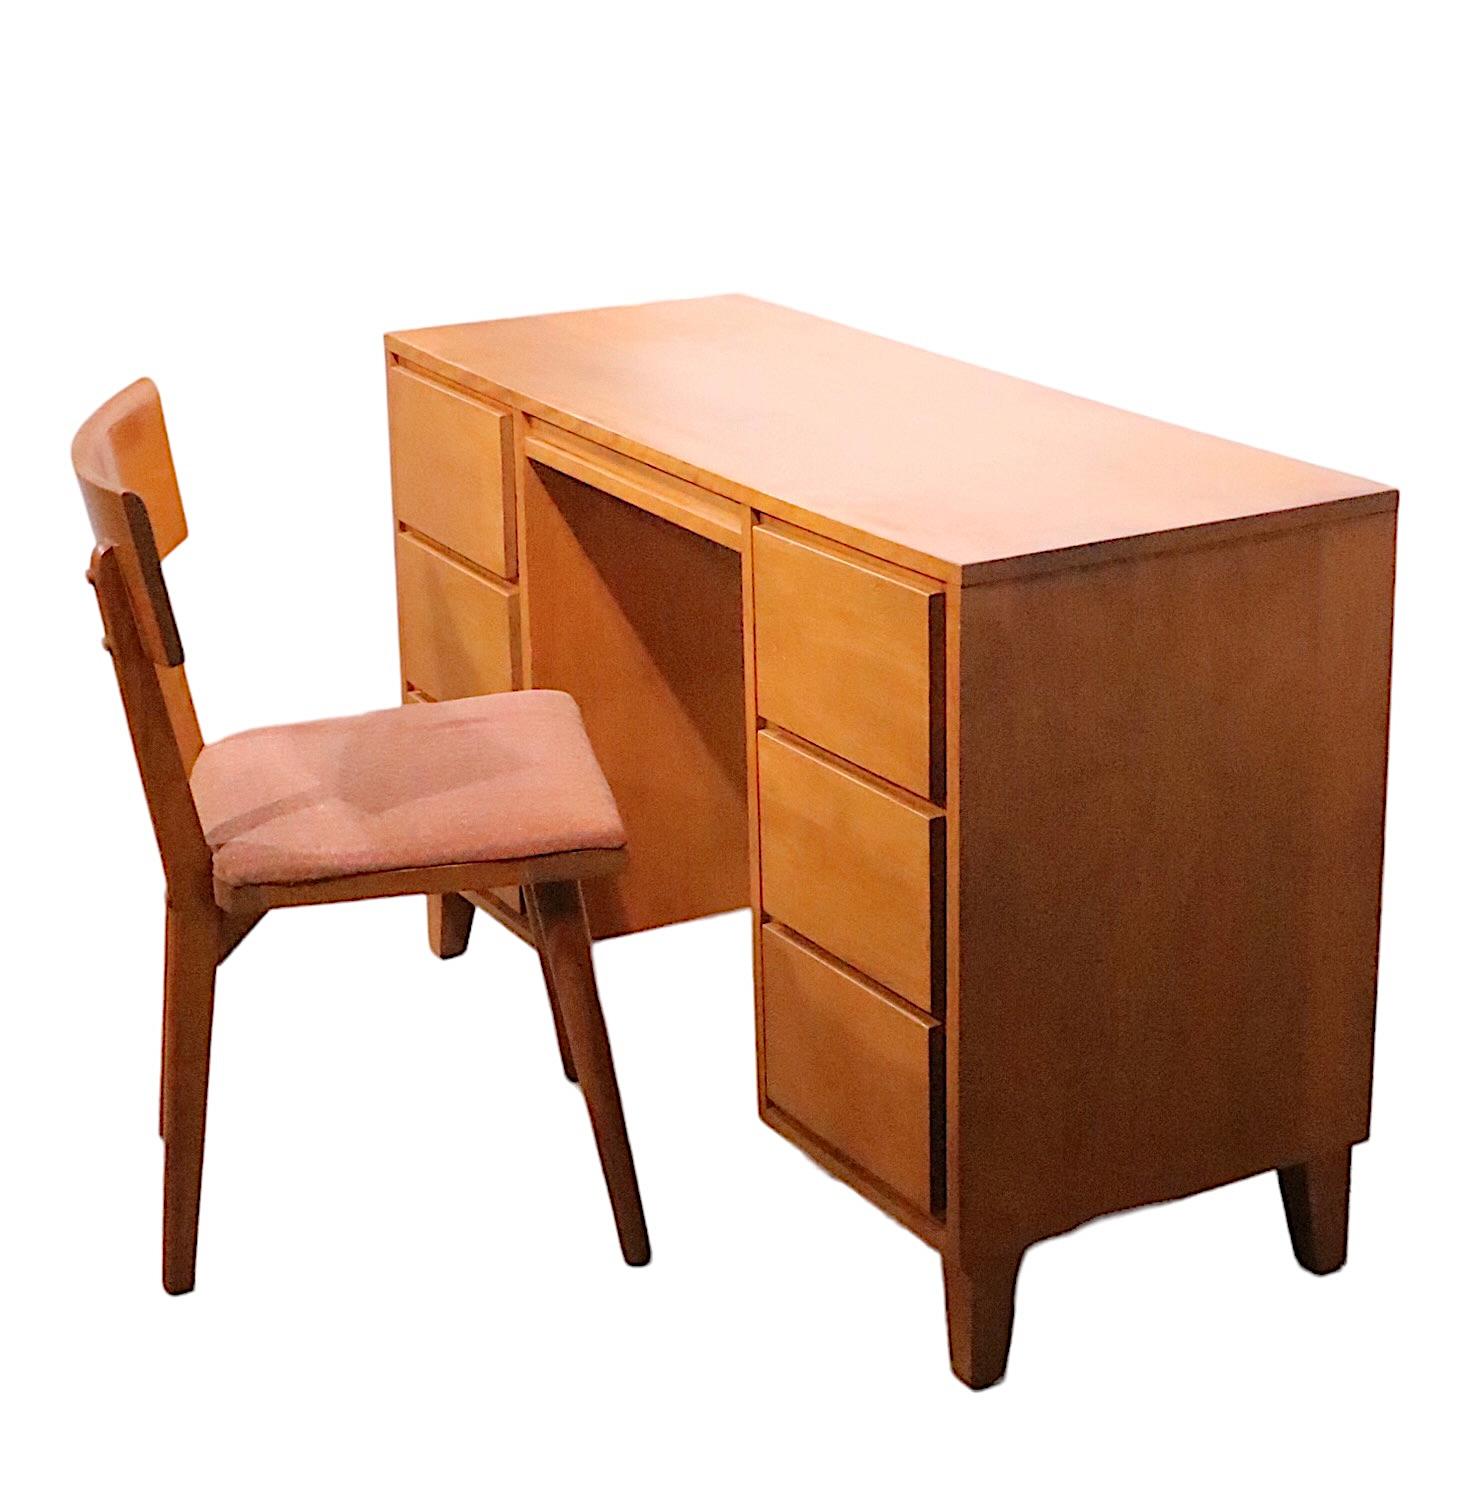 1950's Mid Century Desk and Chair Conant Ball  Modern Mates by Leslie Diamond   For Sale 5